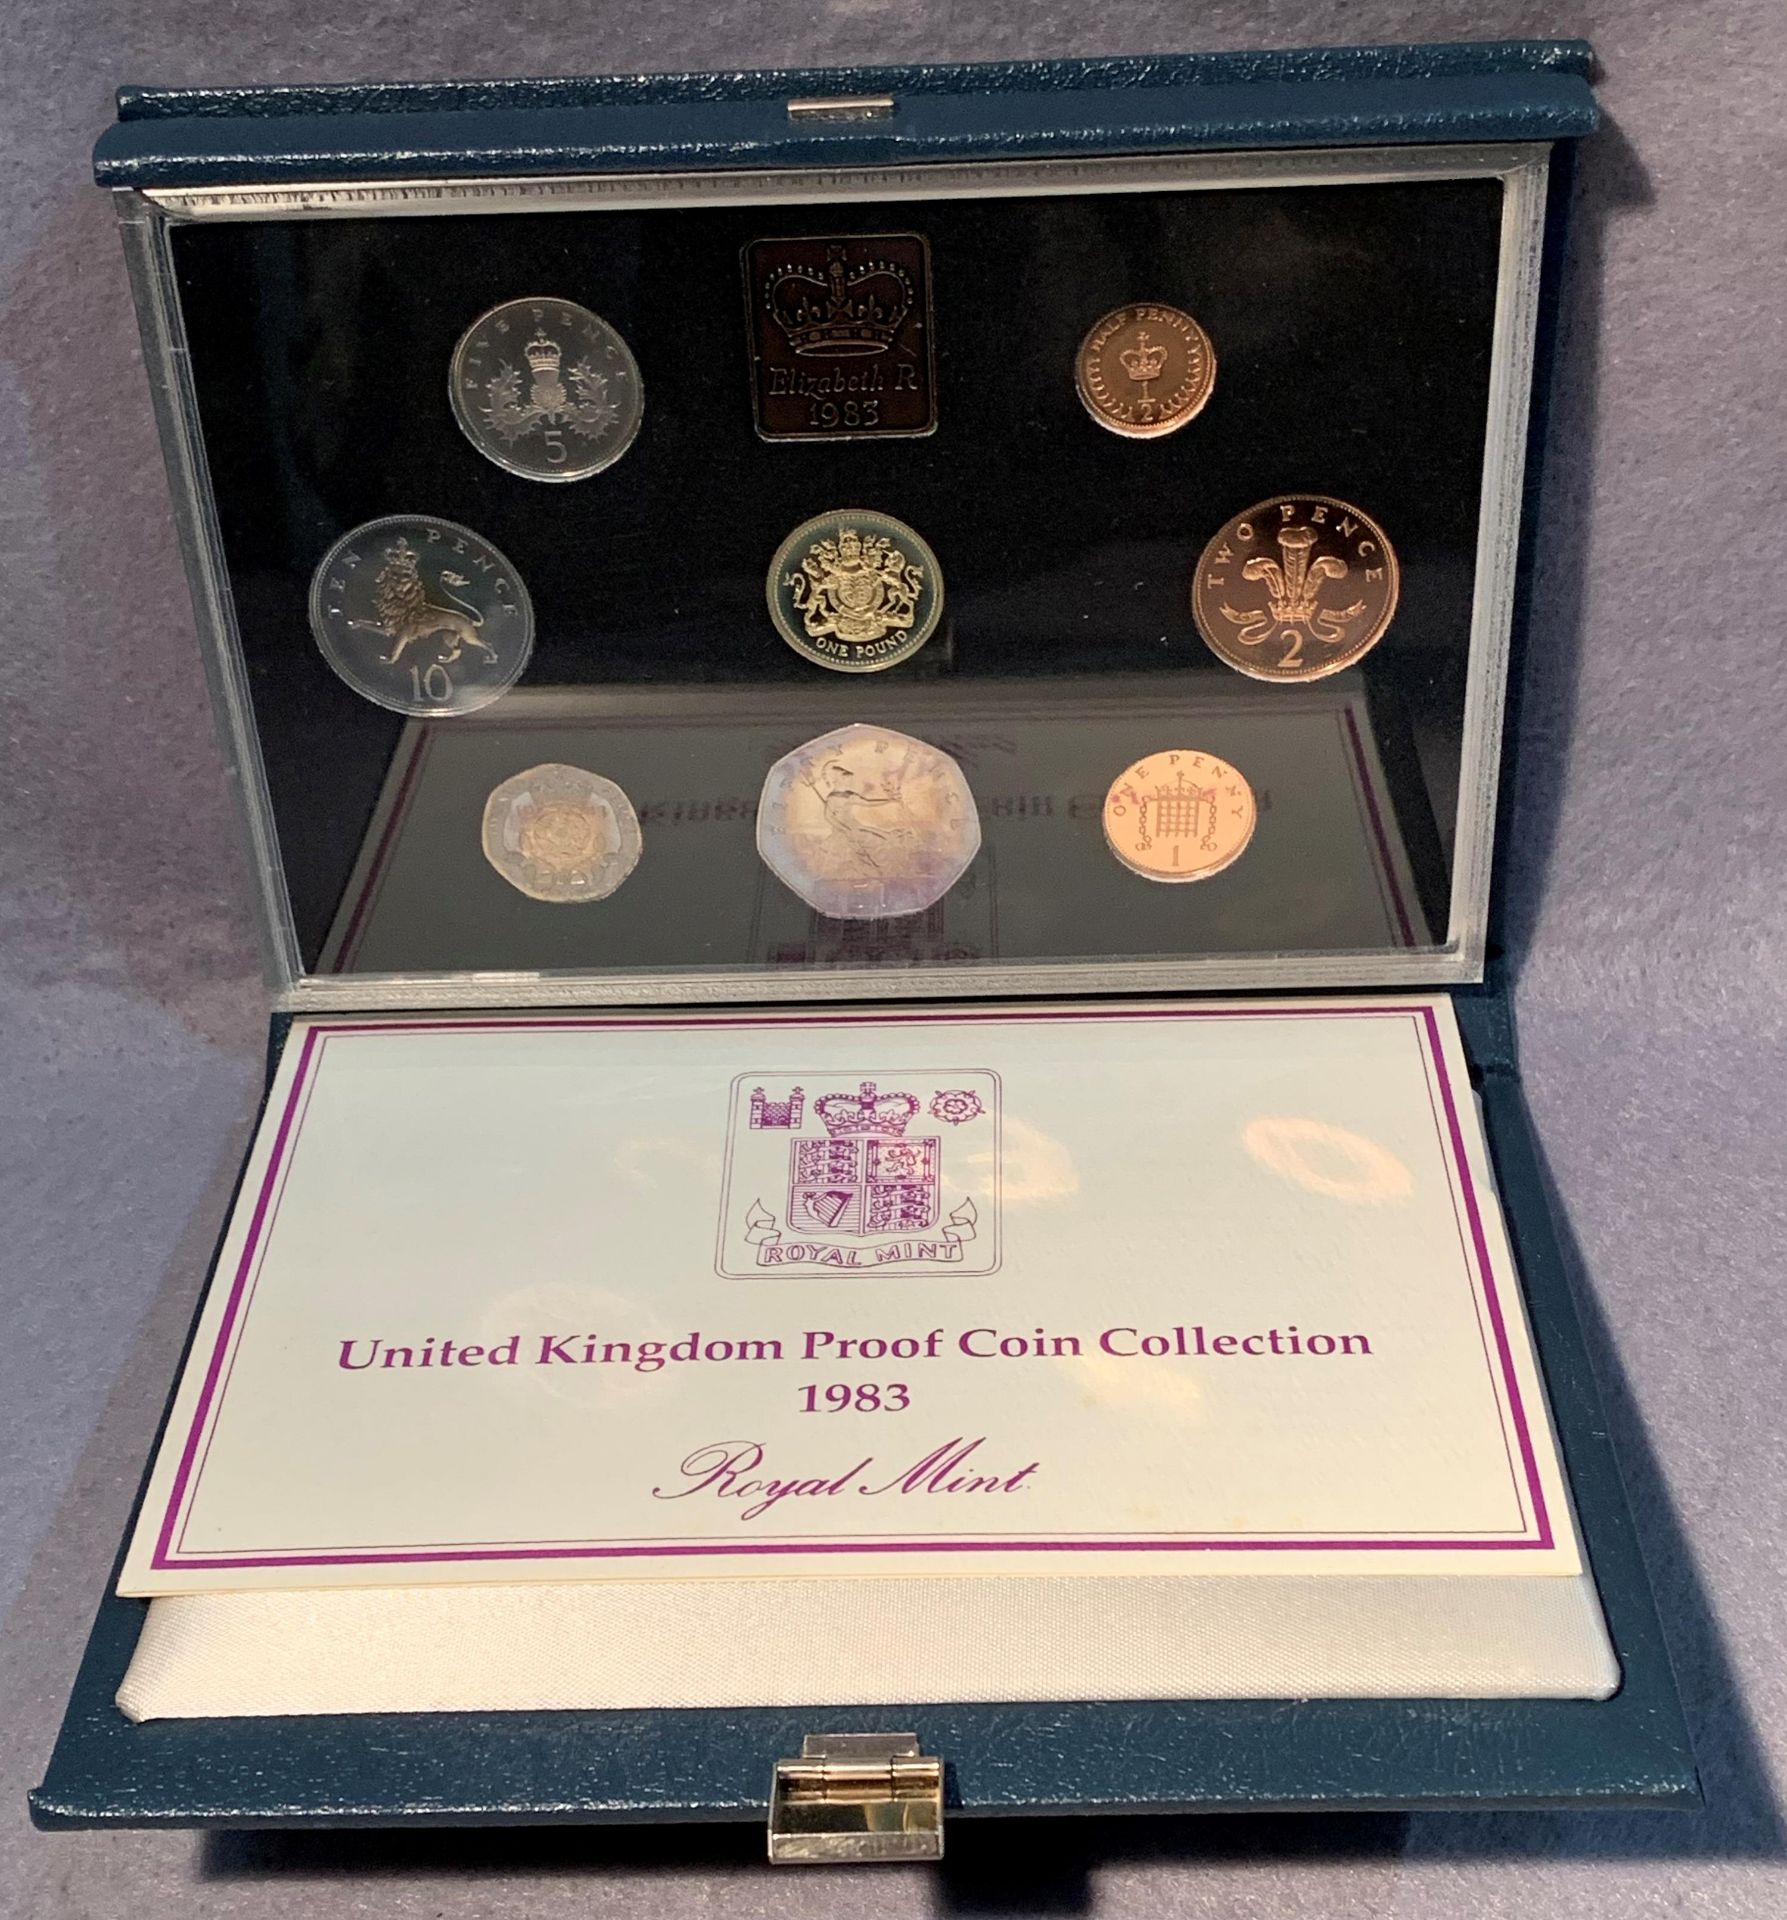 A 1983 Royal Mint UK proof coin collection in case